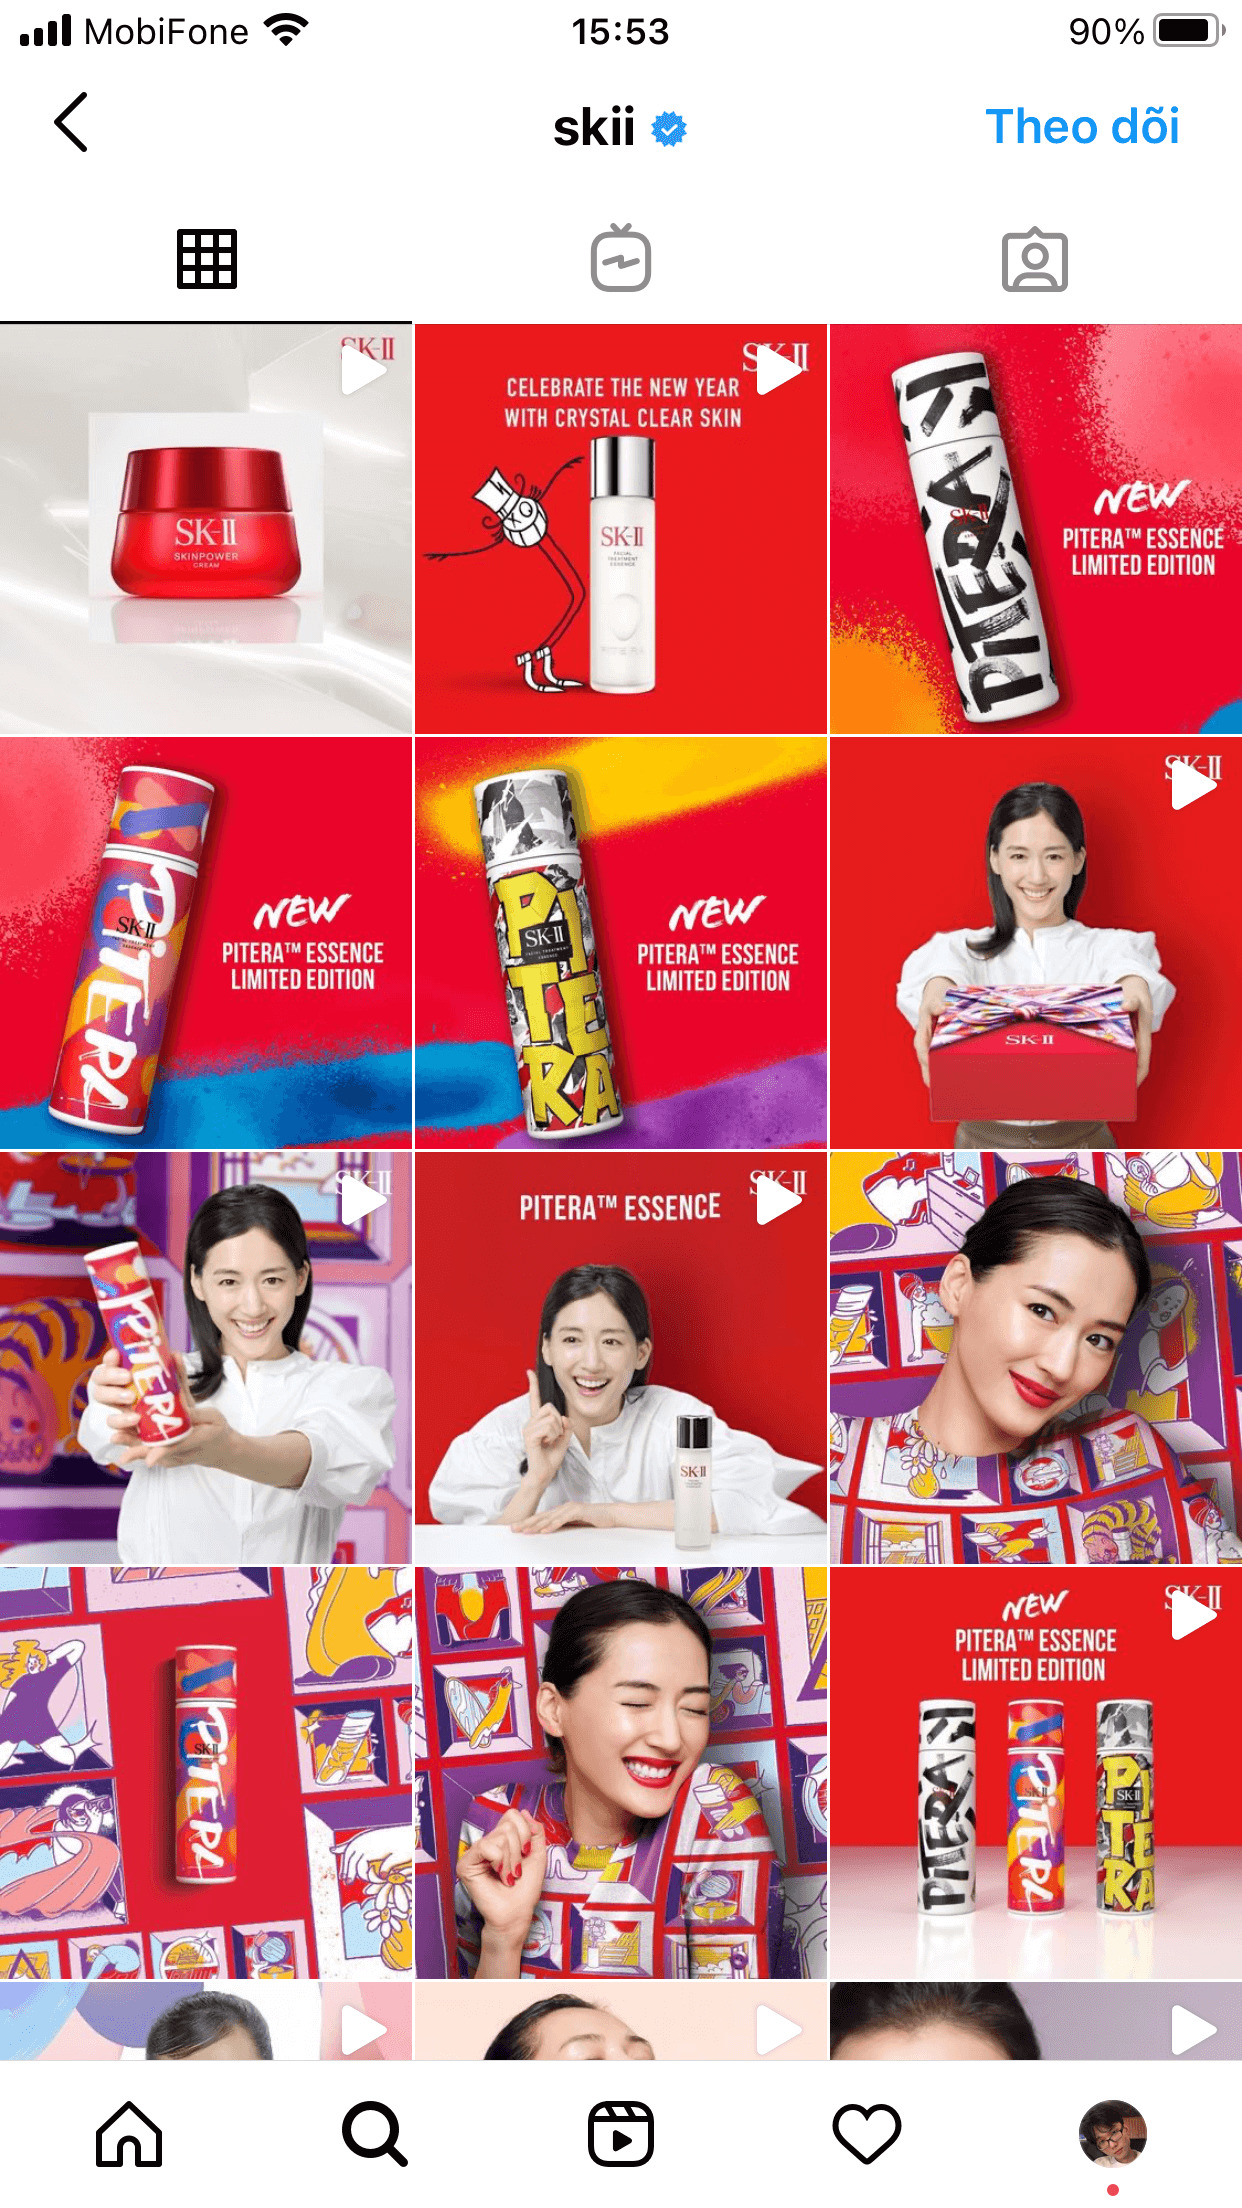 skii’s Instagram feed is all about RED